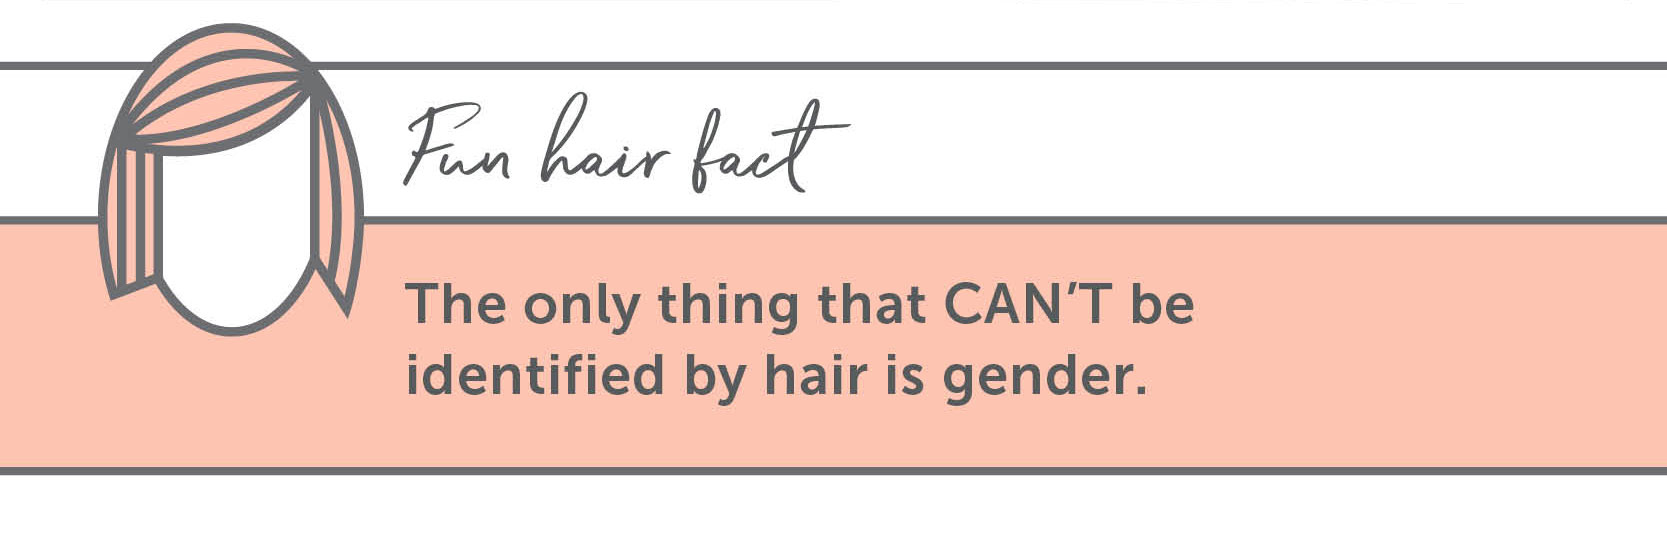 Fun Hair Facts: The only thing that CAN’T be identified by hair is gender.